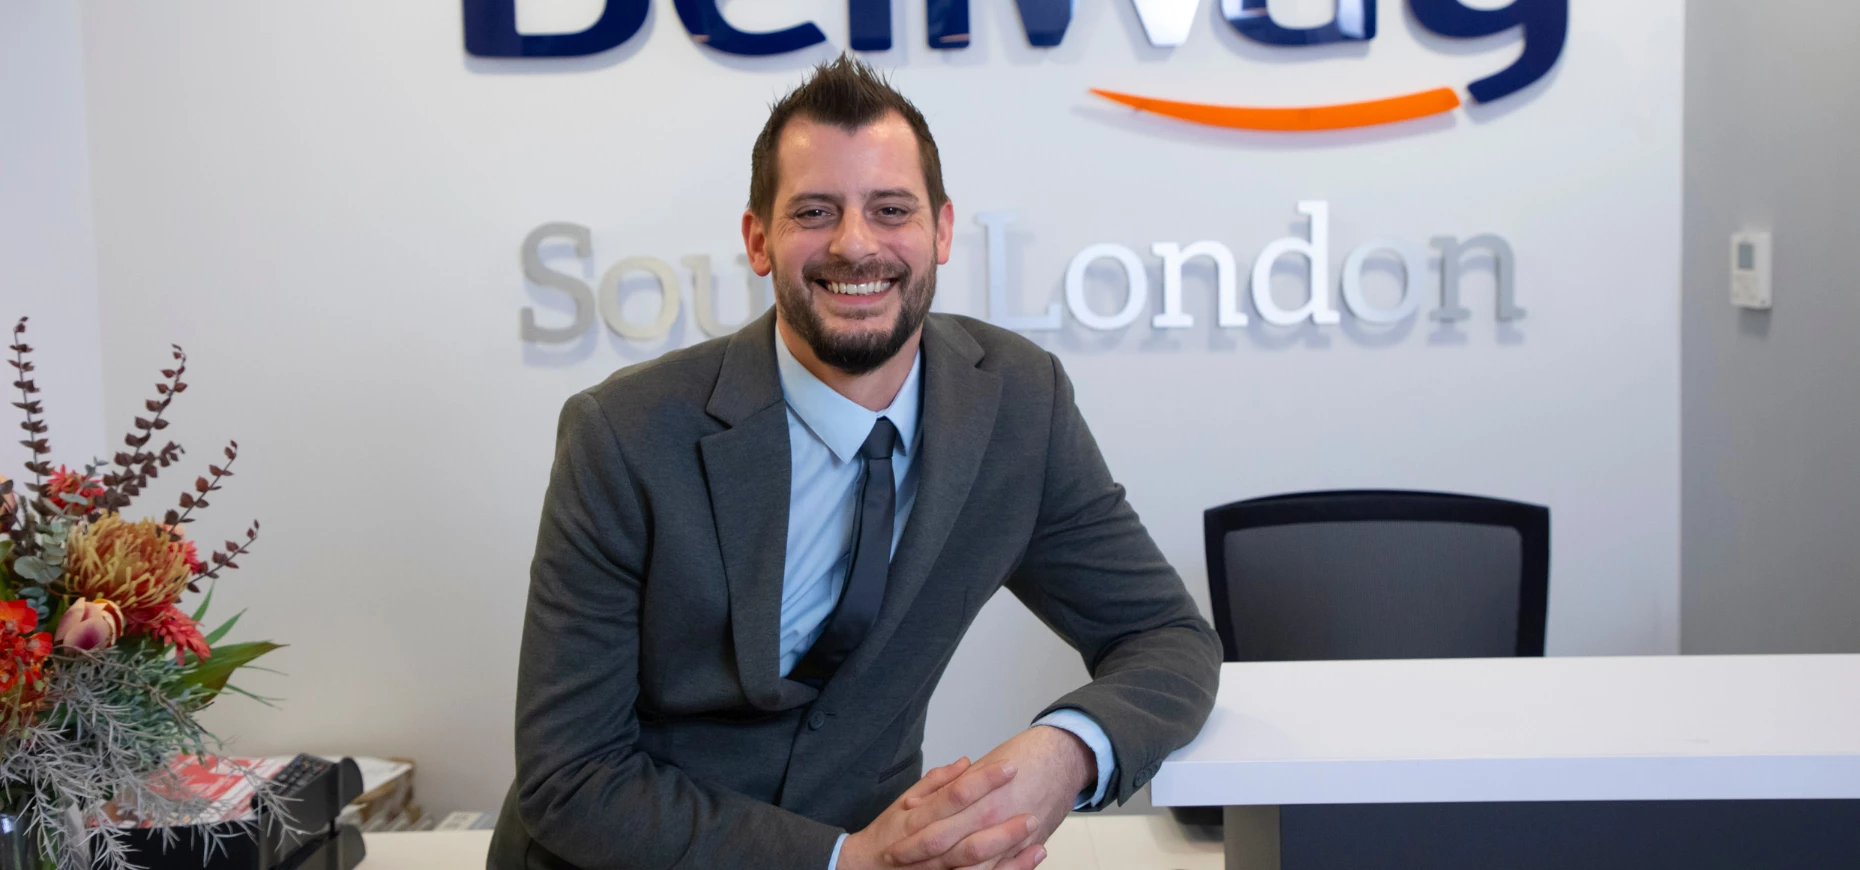 Ian Trindall, newly appointed sales manager for Bellway South London.